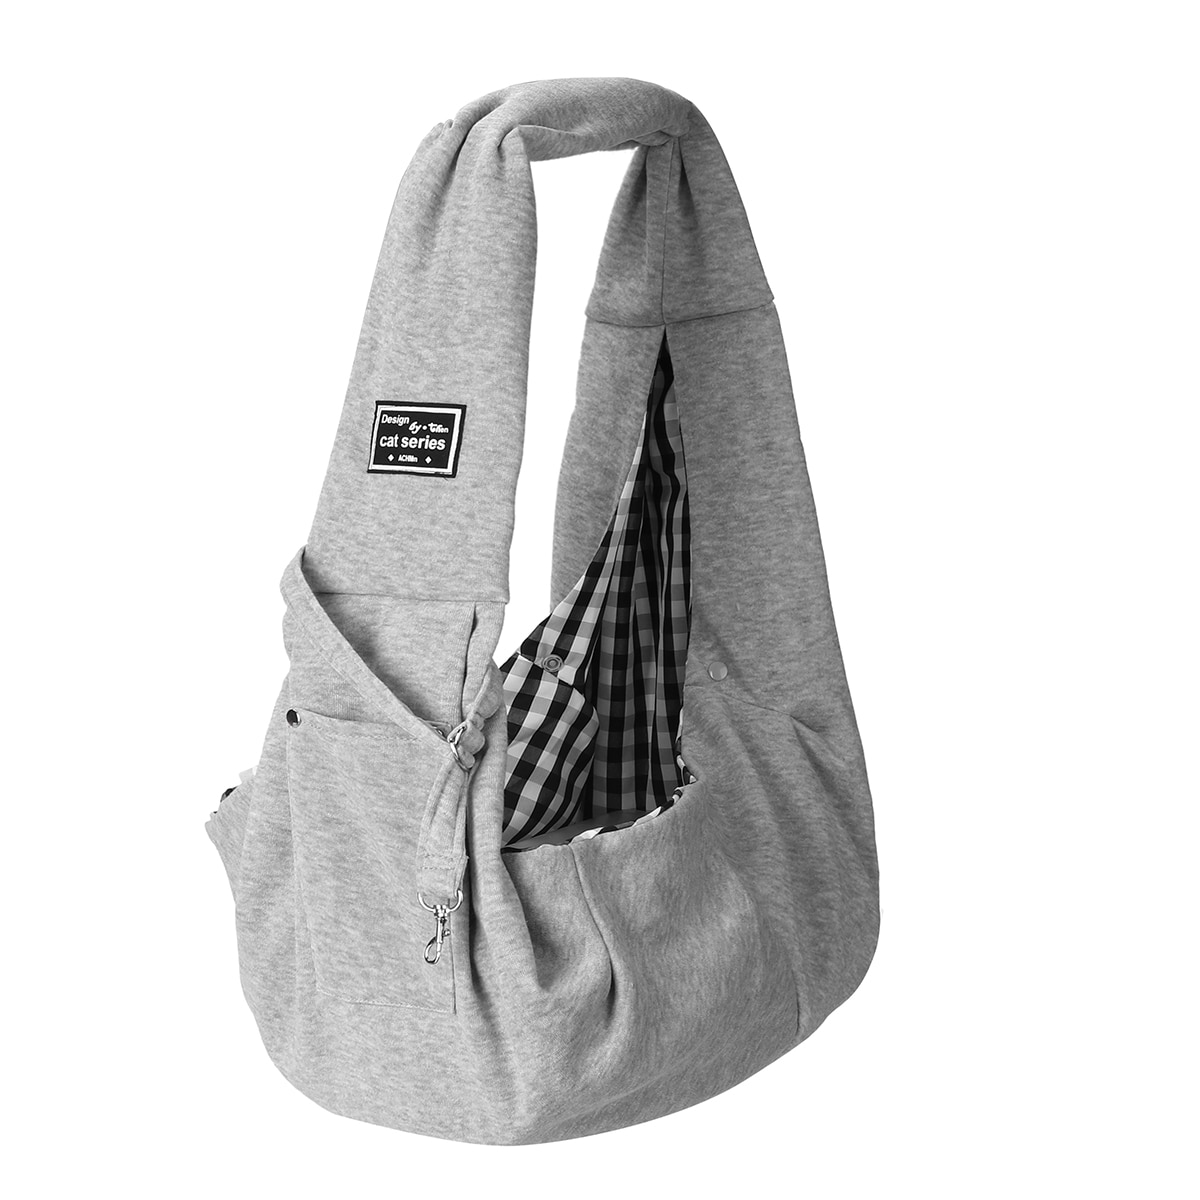 Dog Carrier Bag - Simple And Comfortable